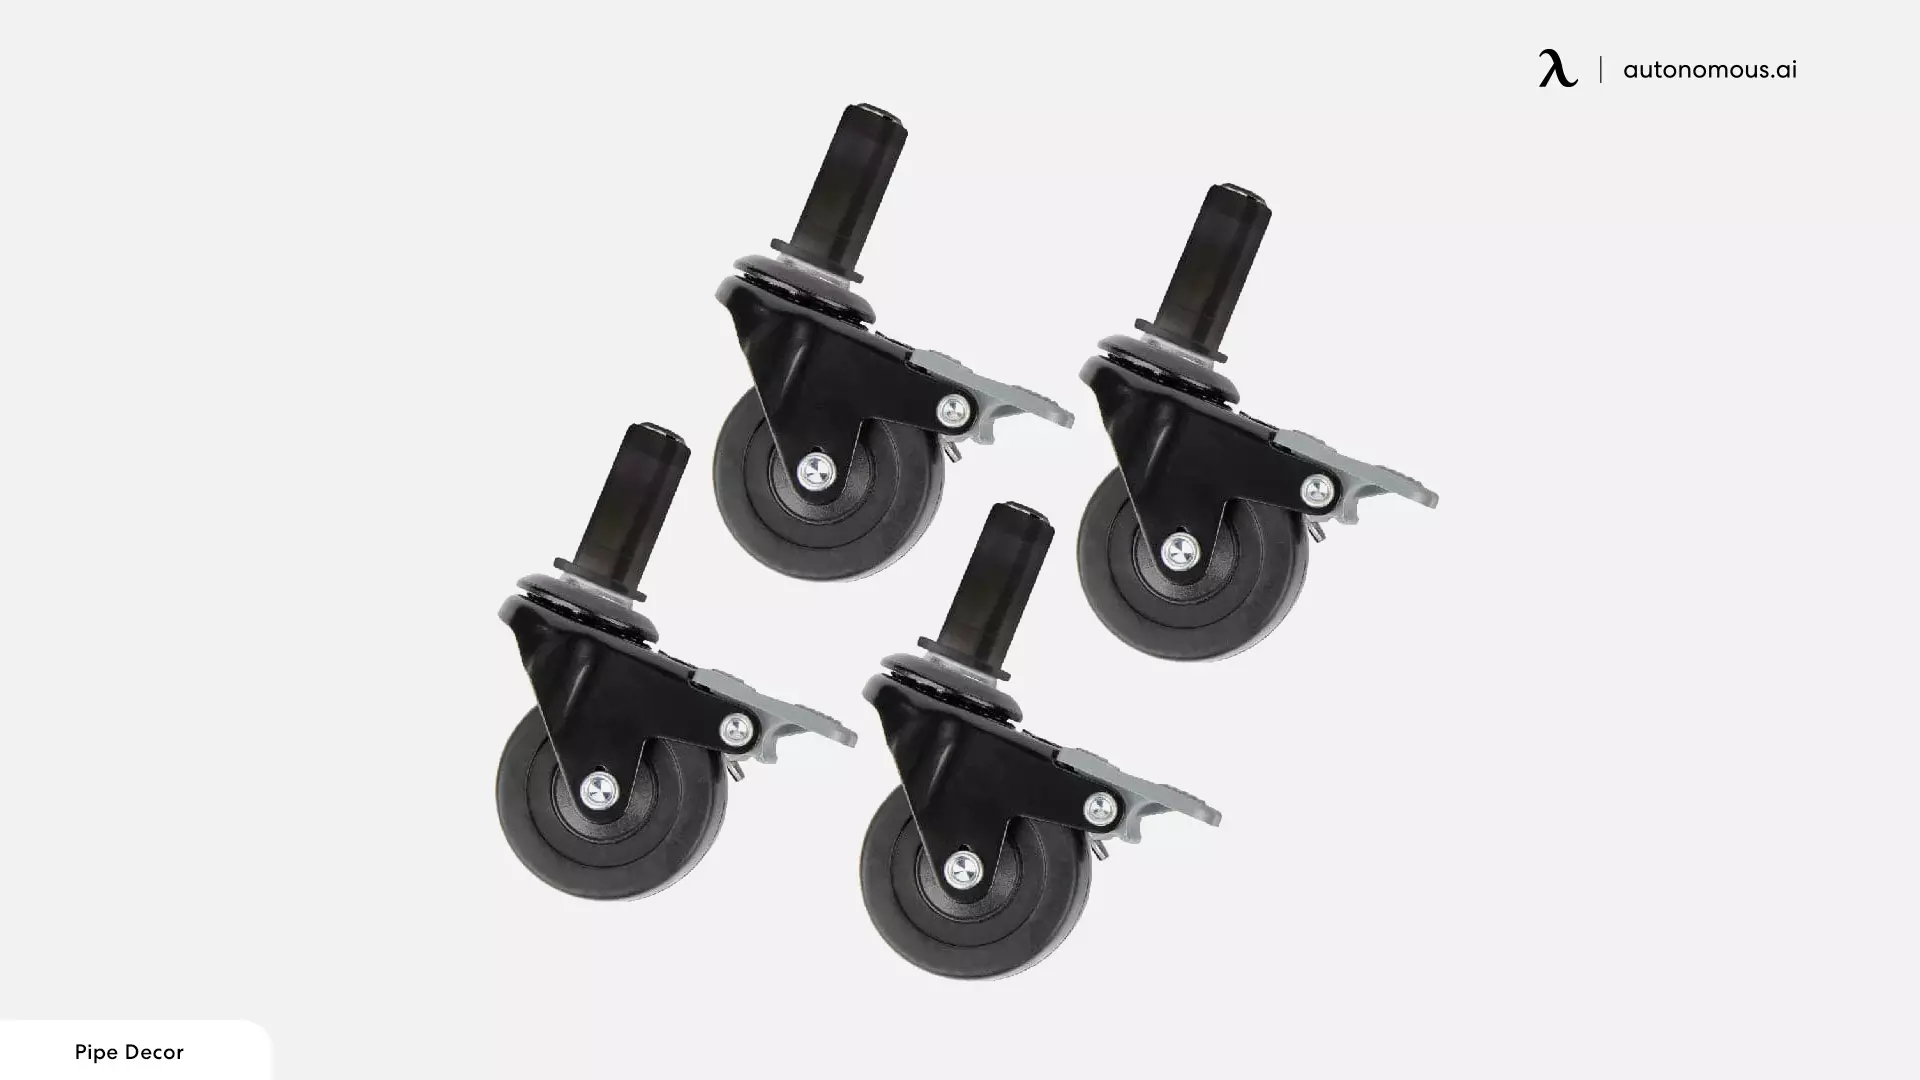 Swivel chair casters